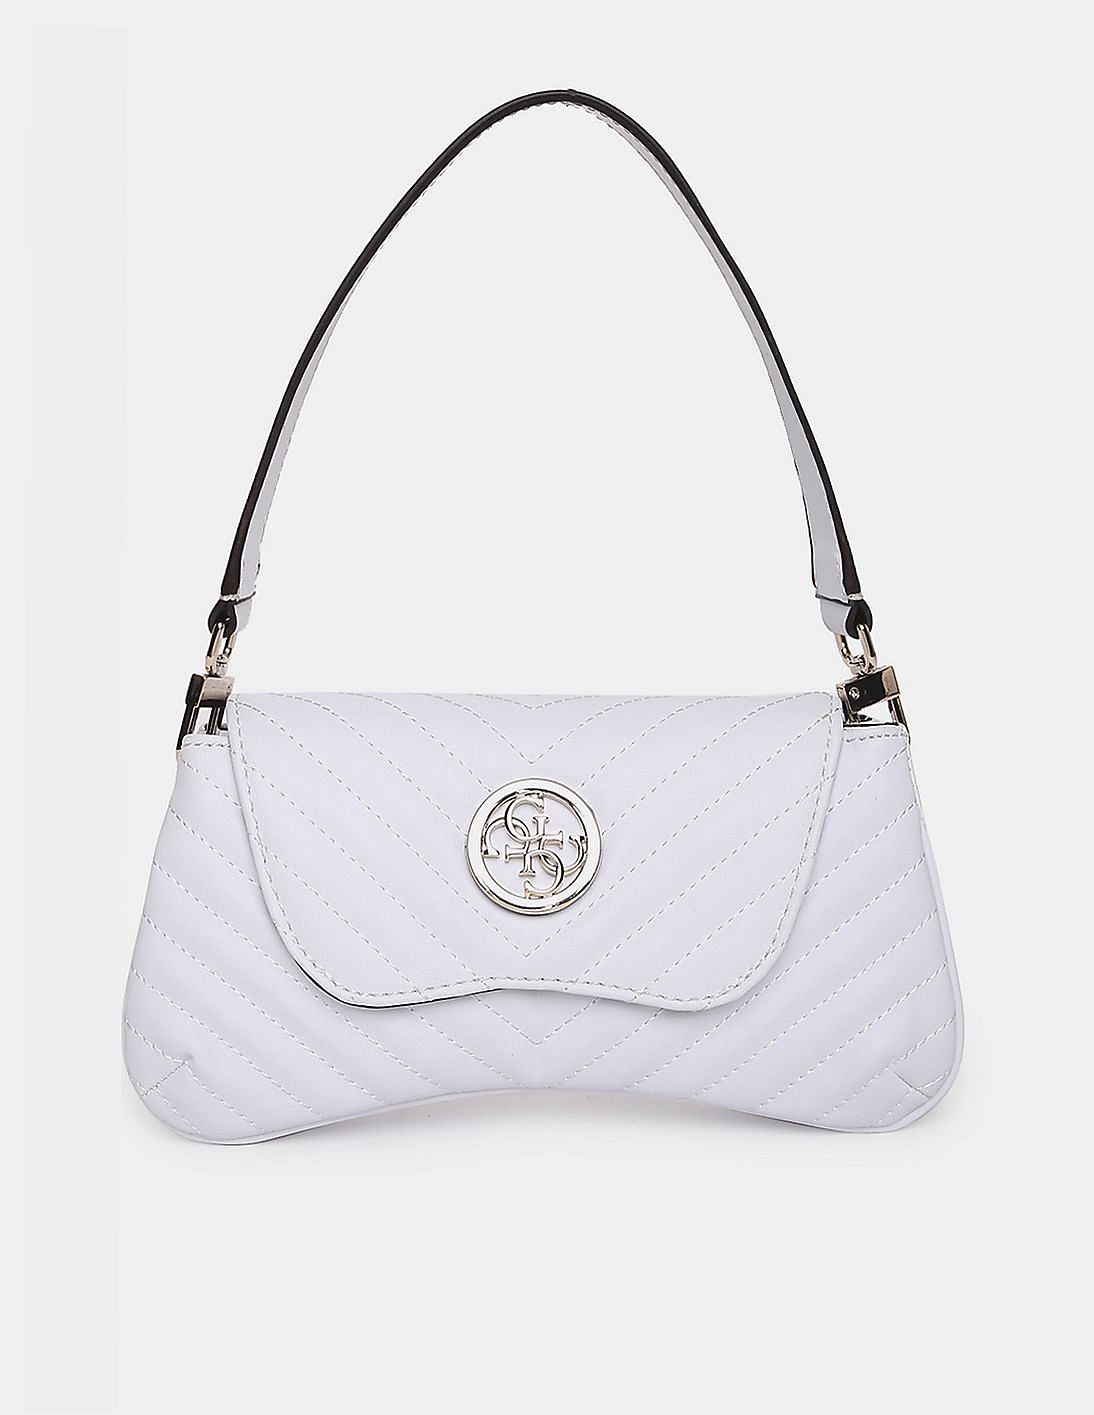 Original Guess Blakely Quilted Top Handle Women's Crossbody Bag - White